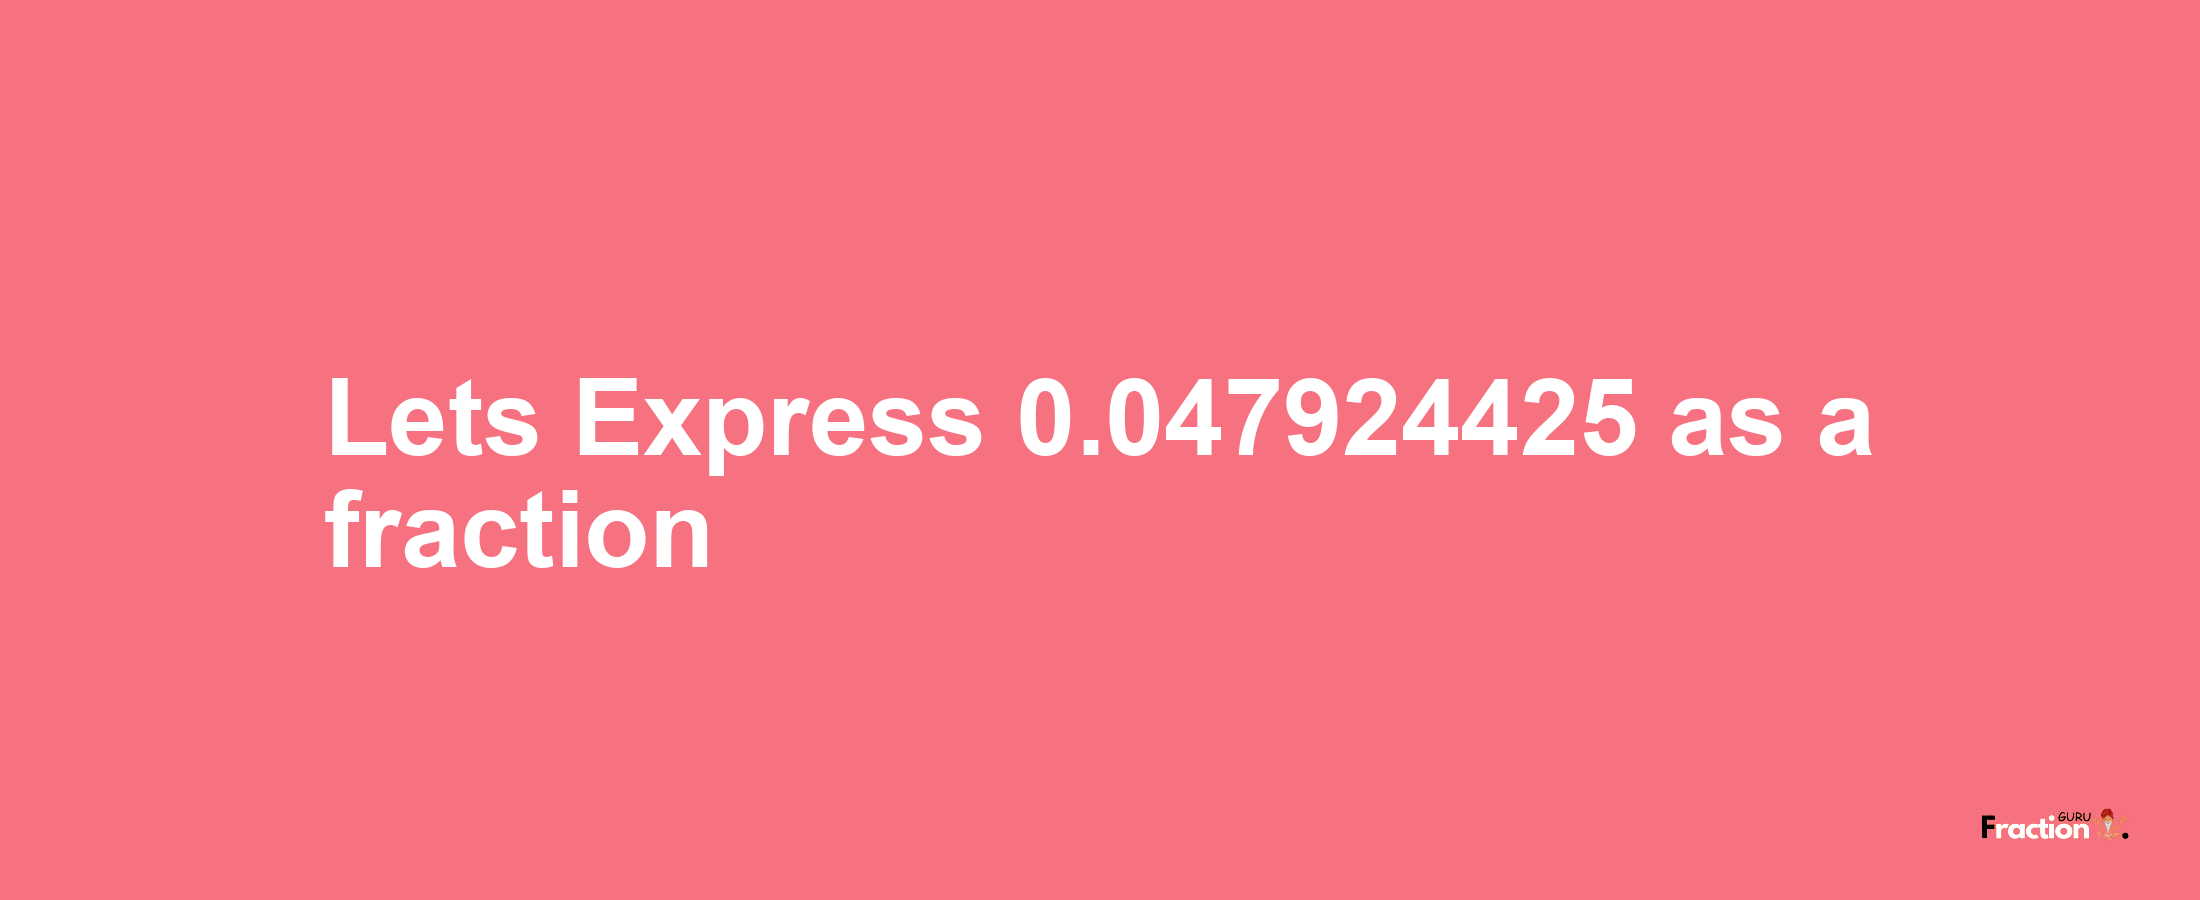 Lets Express 0.047924425 as afraction